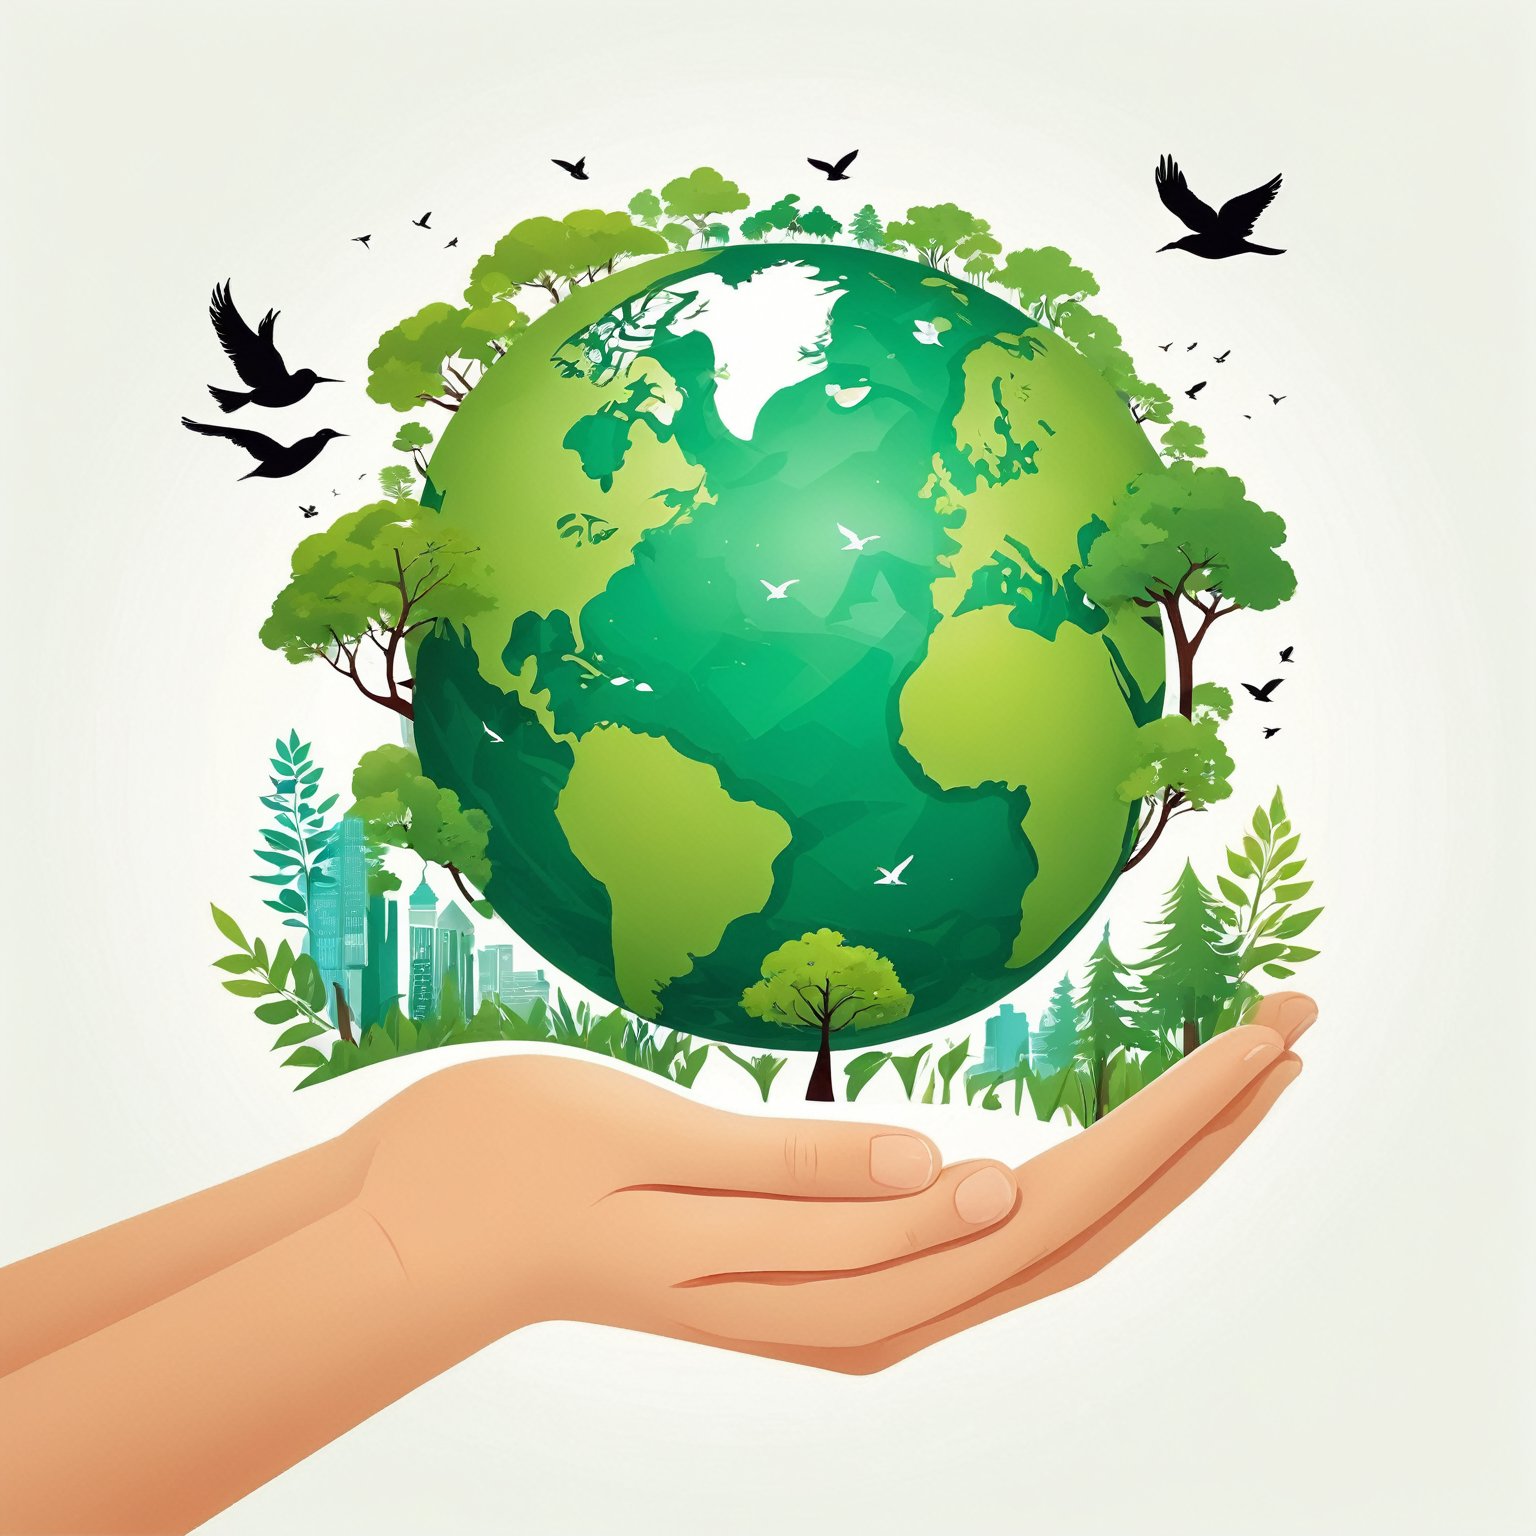 (best quality,8K,highres,masterpiece), ultra-detailed, tree planting, vector illustration, hands holding a green earth globe with trees and birds flying around it, white background